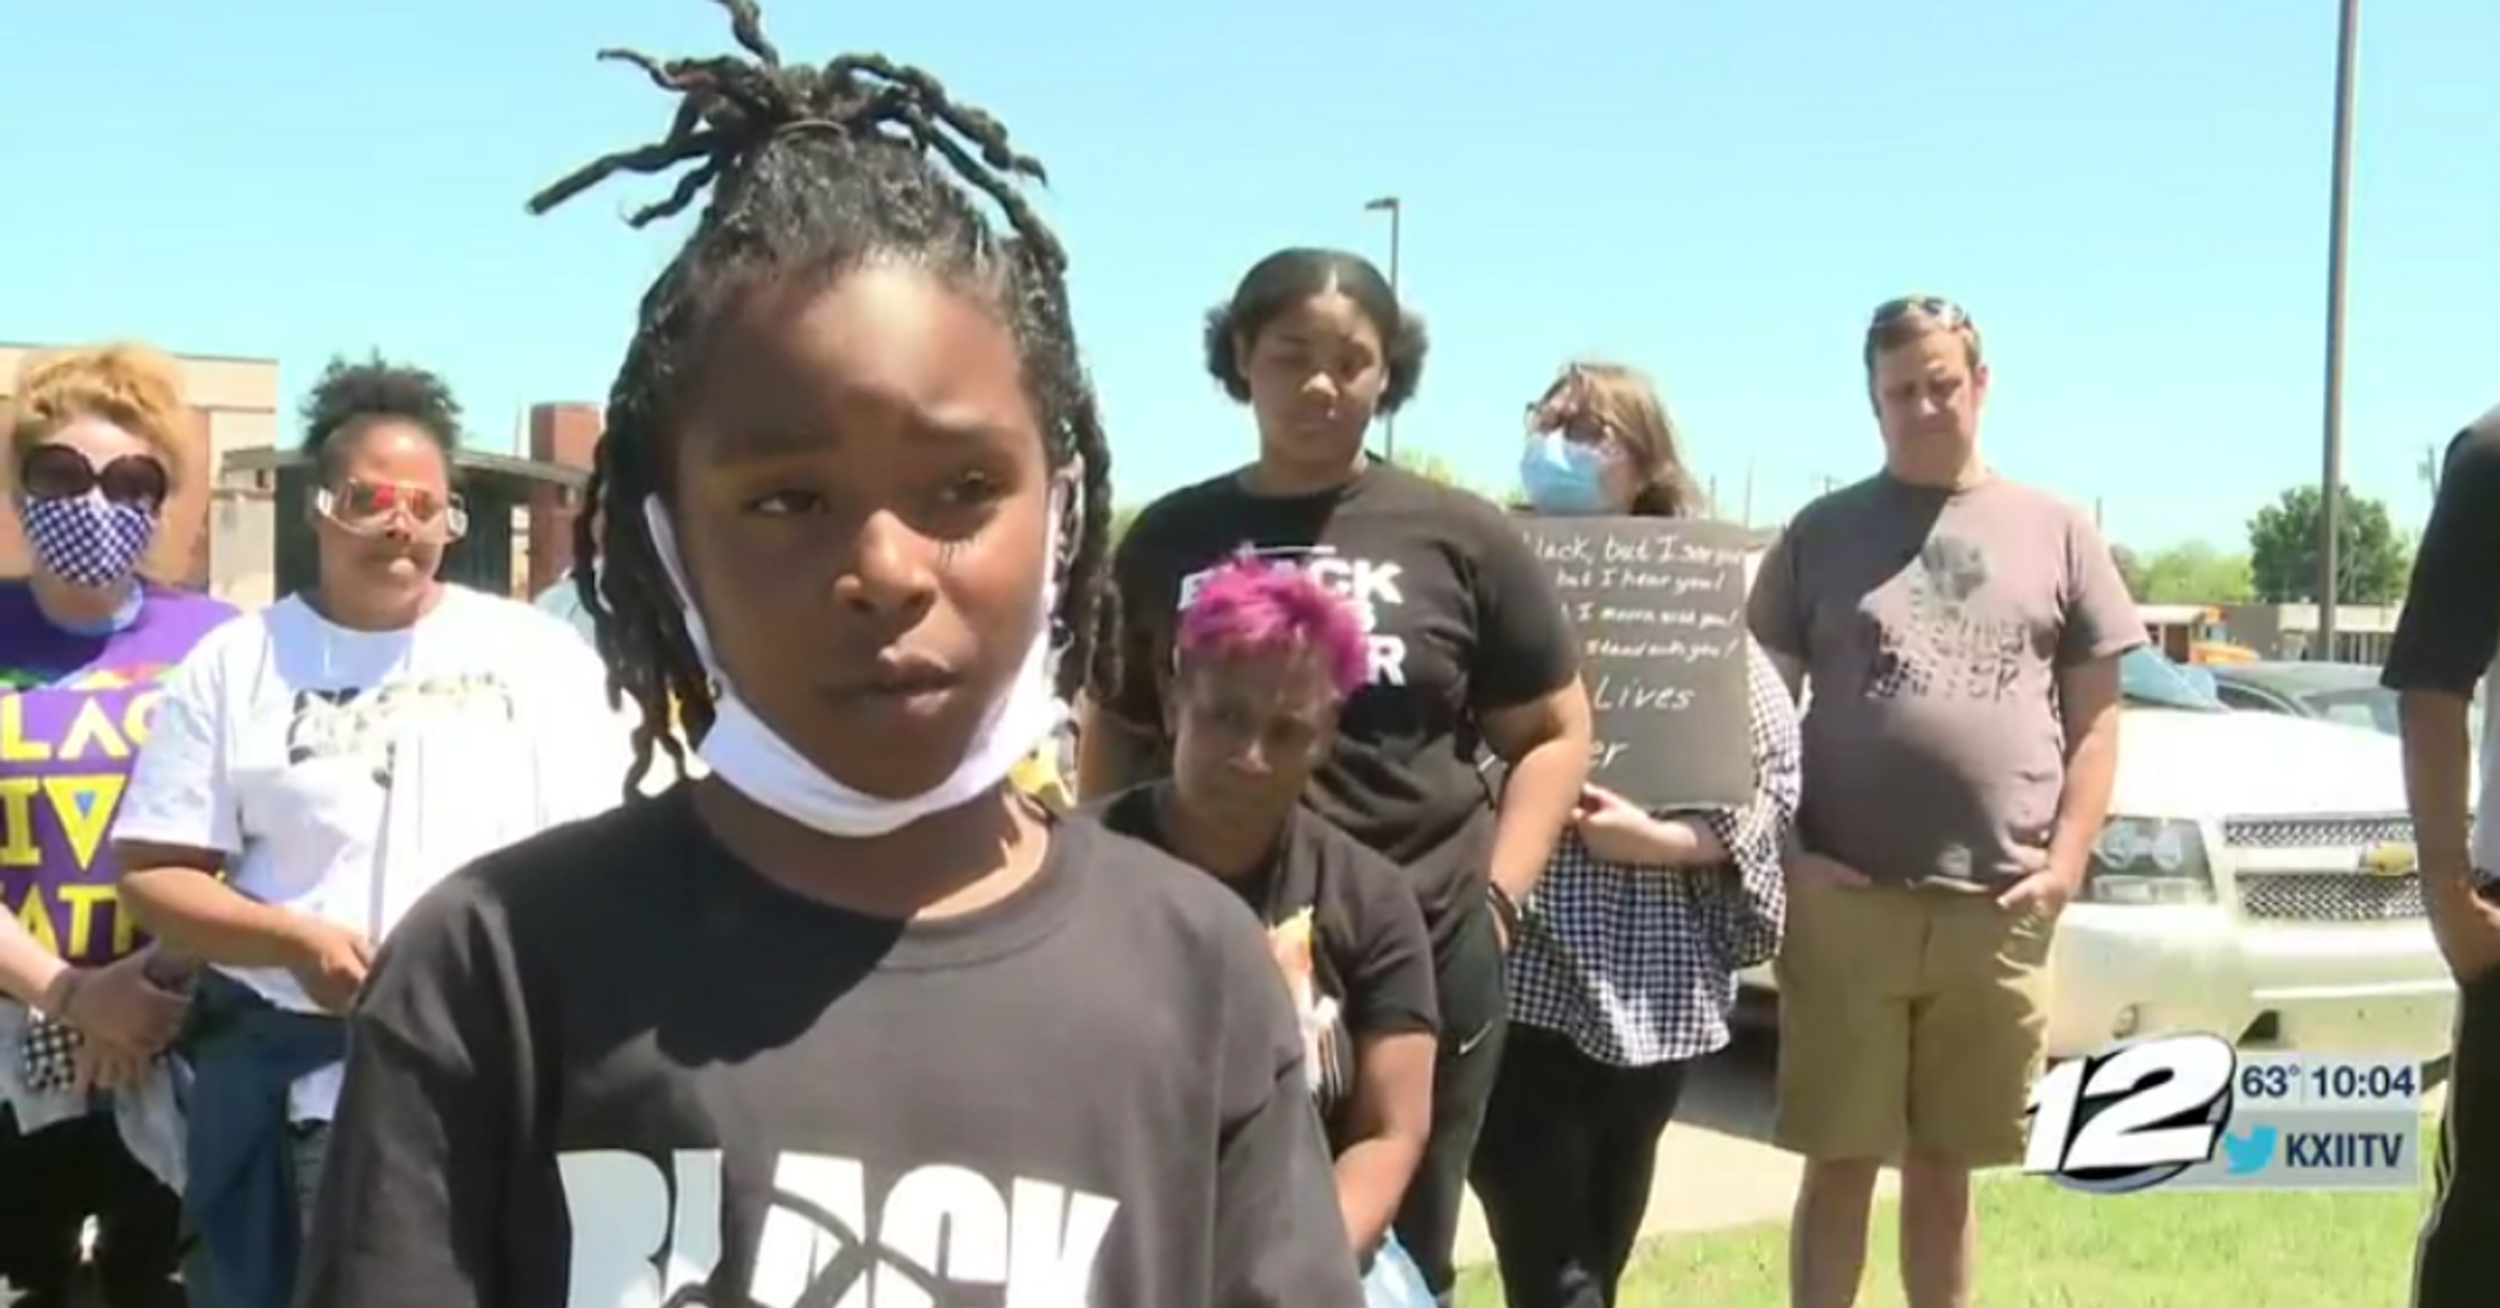 Oklahoma Elementary School Called Out After Harshly Punishing Black Boy For Wearing BLM Shirt